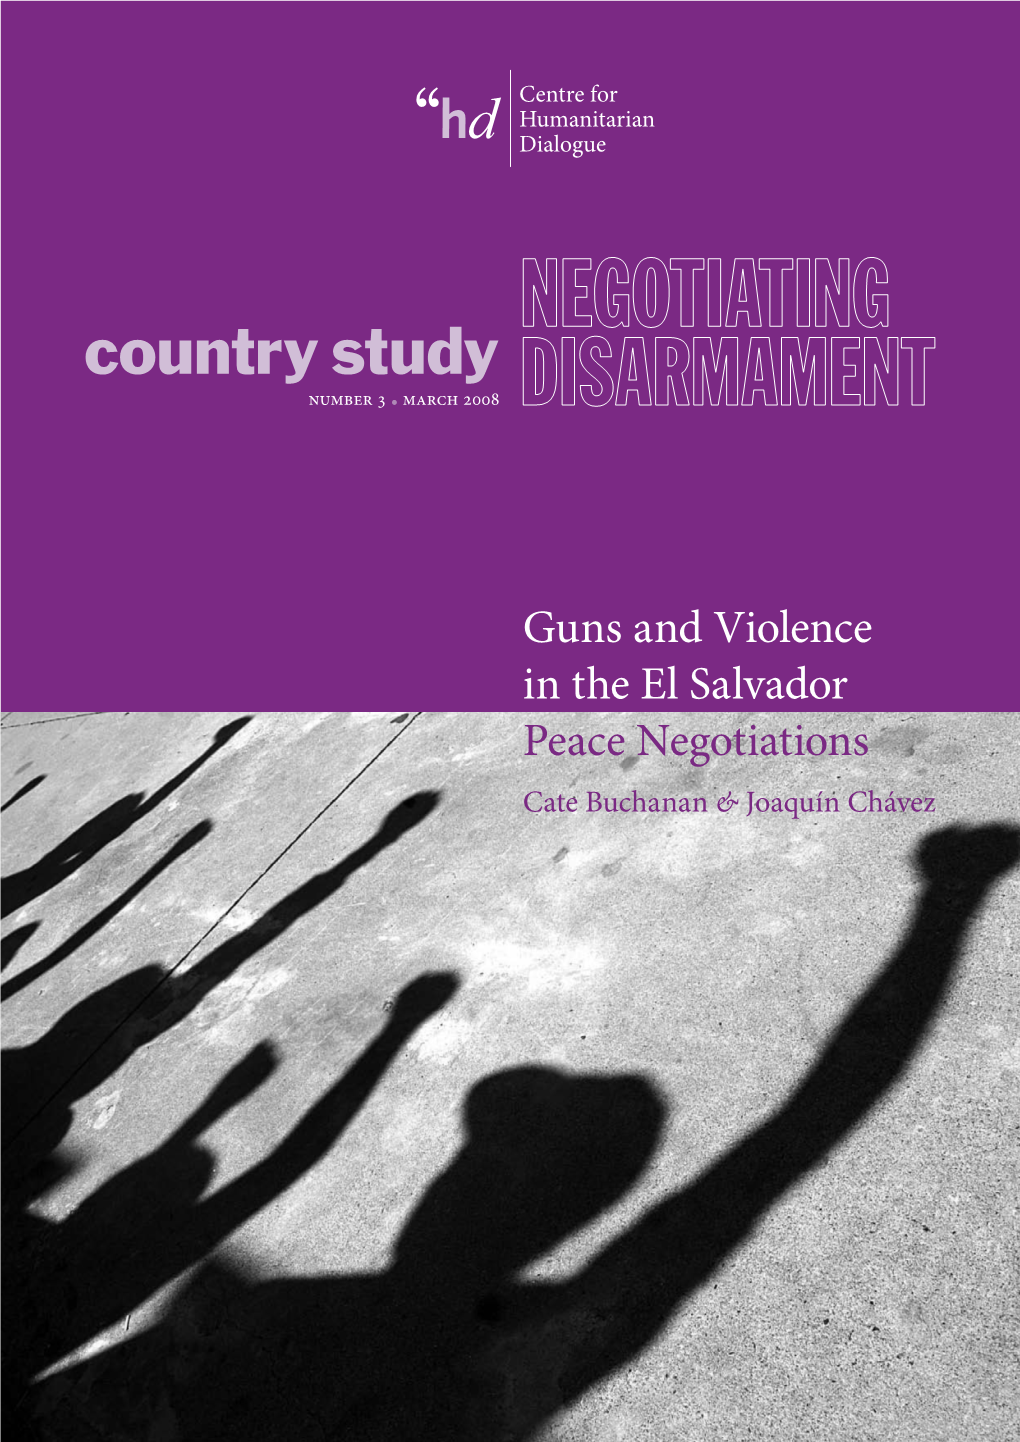 Guns and Violence in the El Salvador Peace Negotiations Cate Buchanan & Joaquín Chávez ABOUT the HD CENTRE